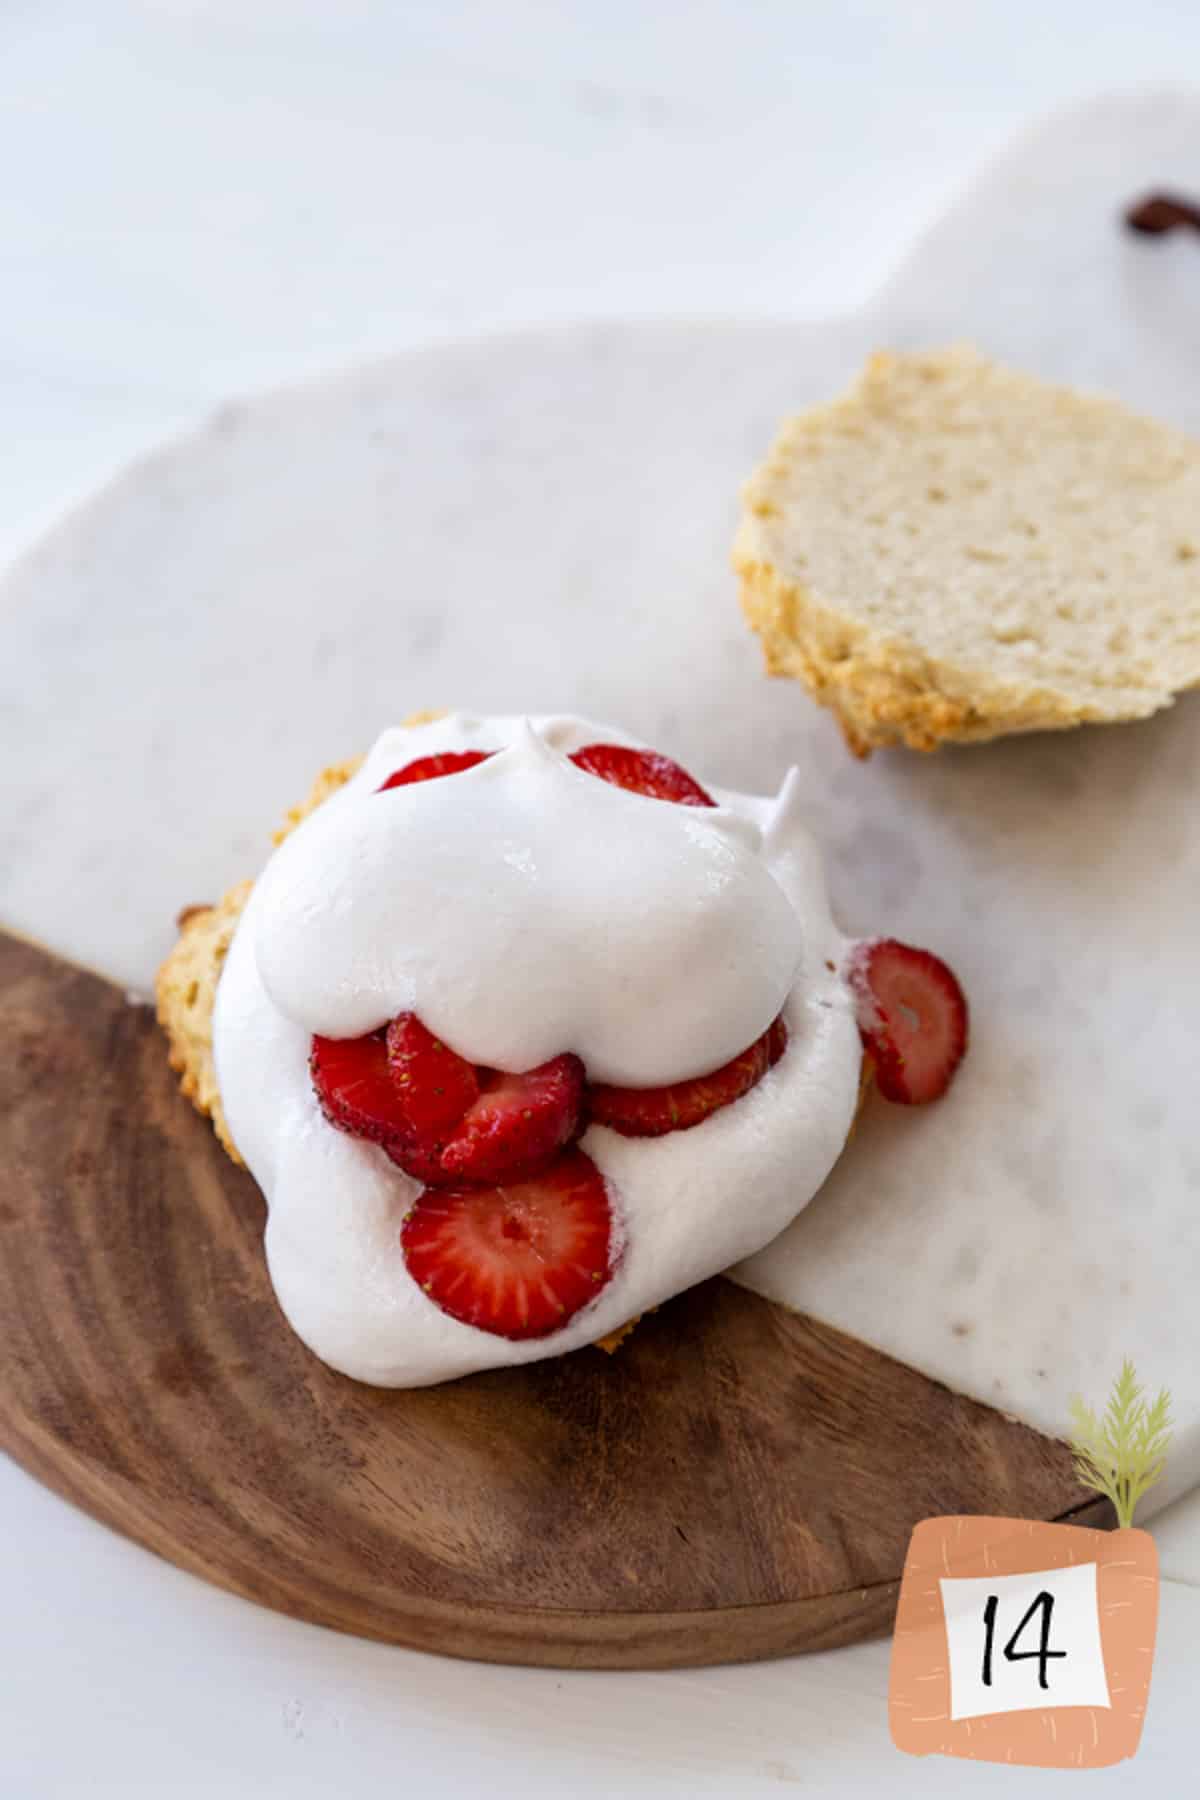 A sliced biscuit with strawberries and whipped cream.